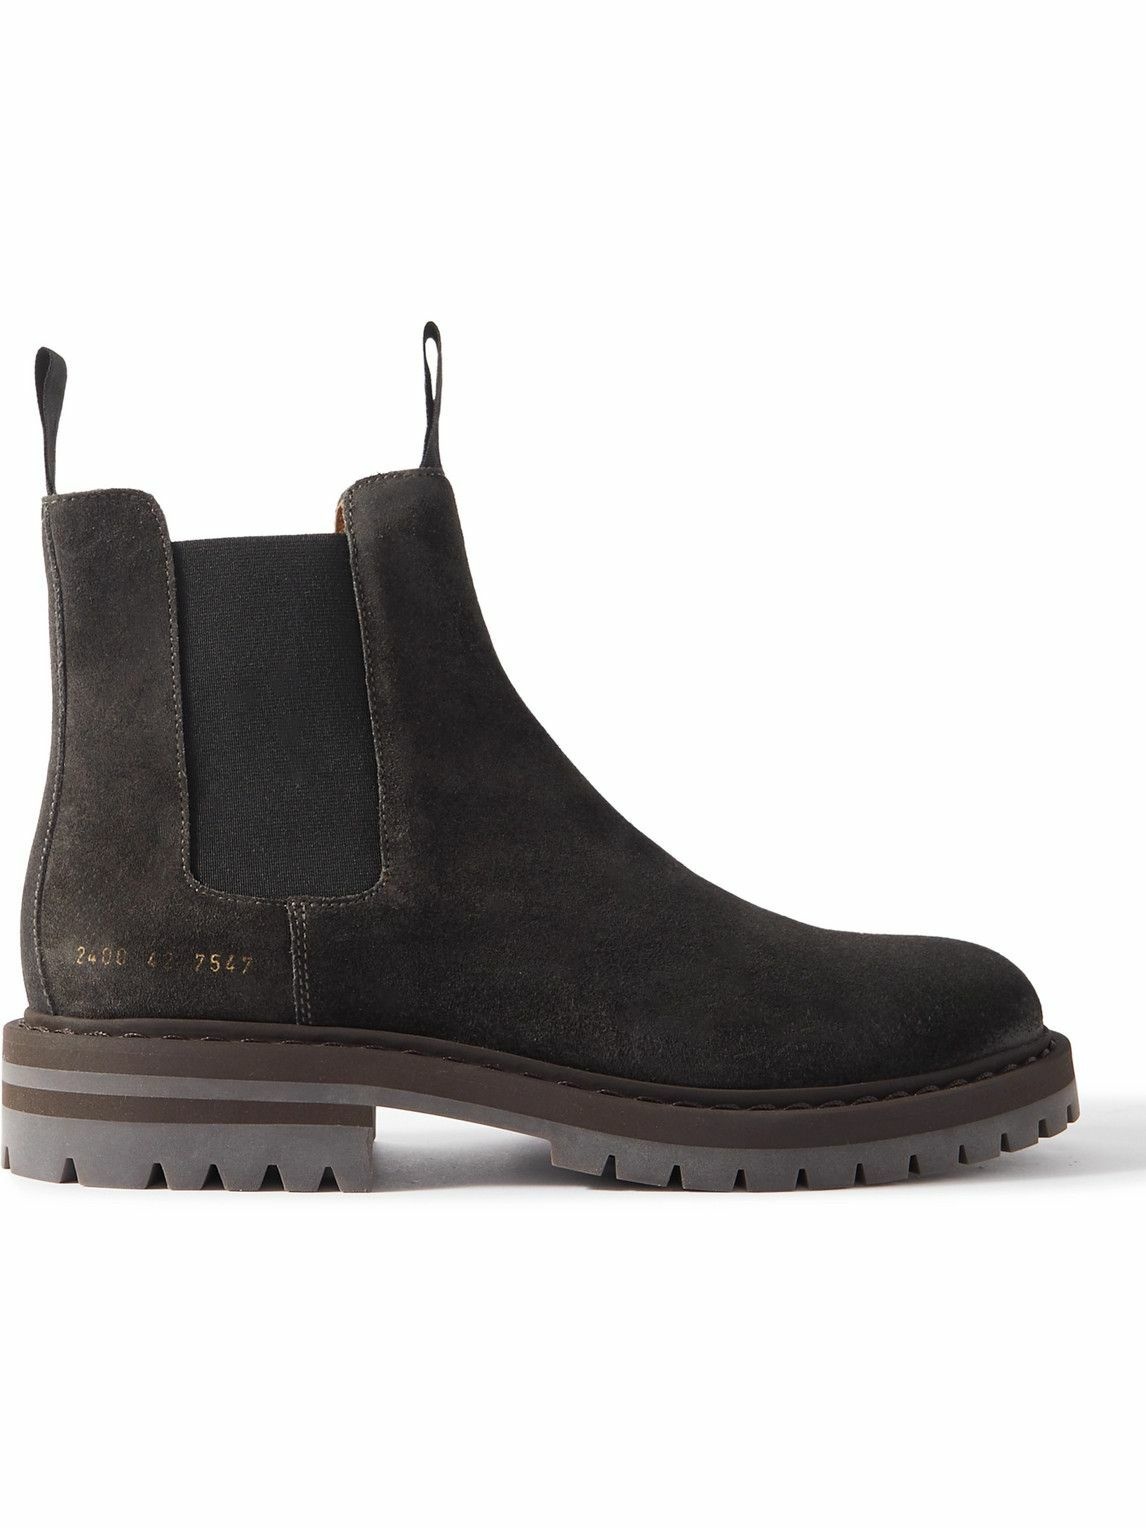 Common Projects - Suede Chelsea Boots - Black Common Projects